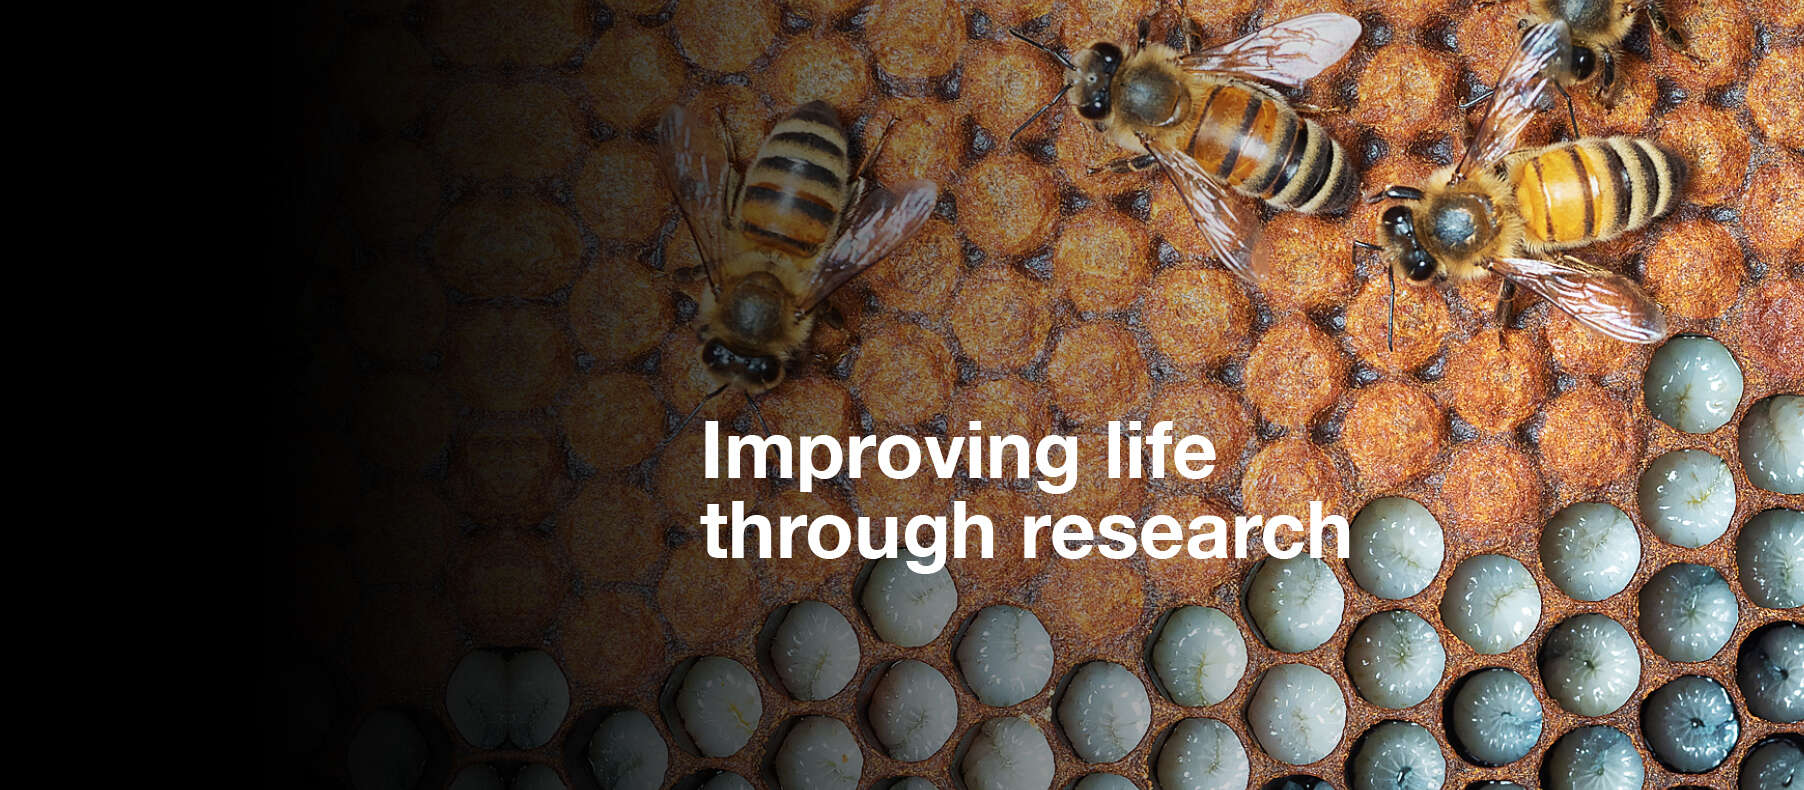 A closeup of a bees with the words "Improving life through research"